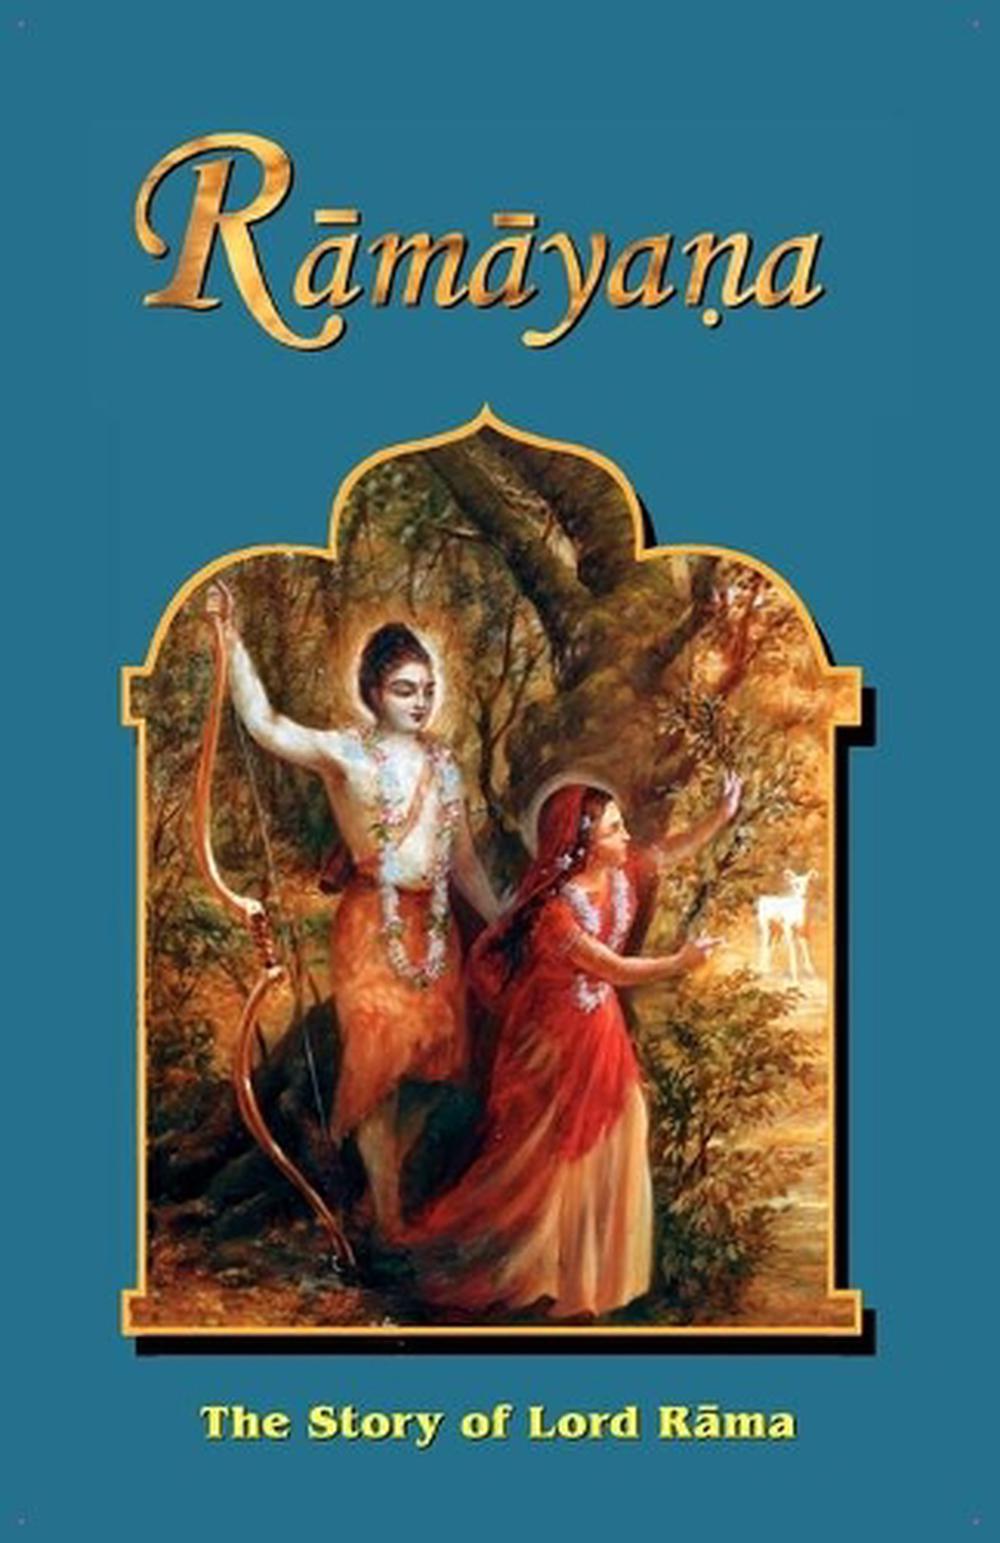 book review of ramayana in english